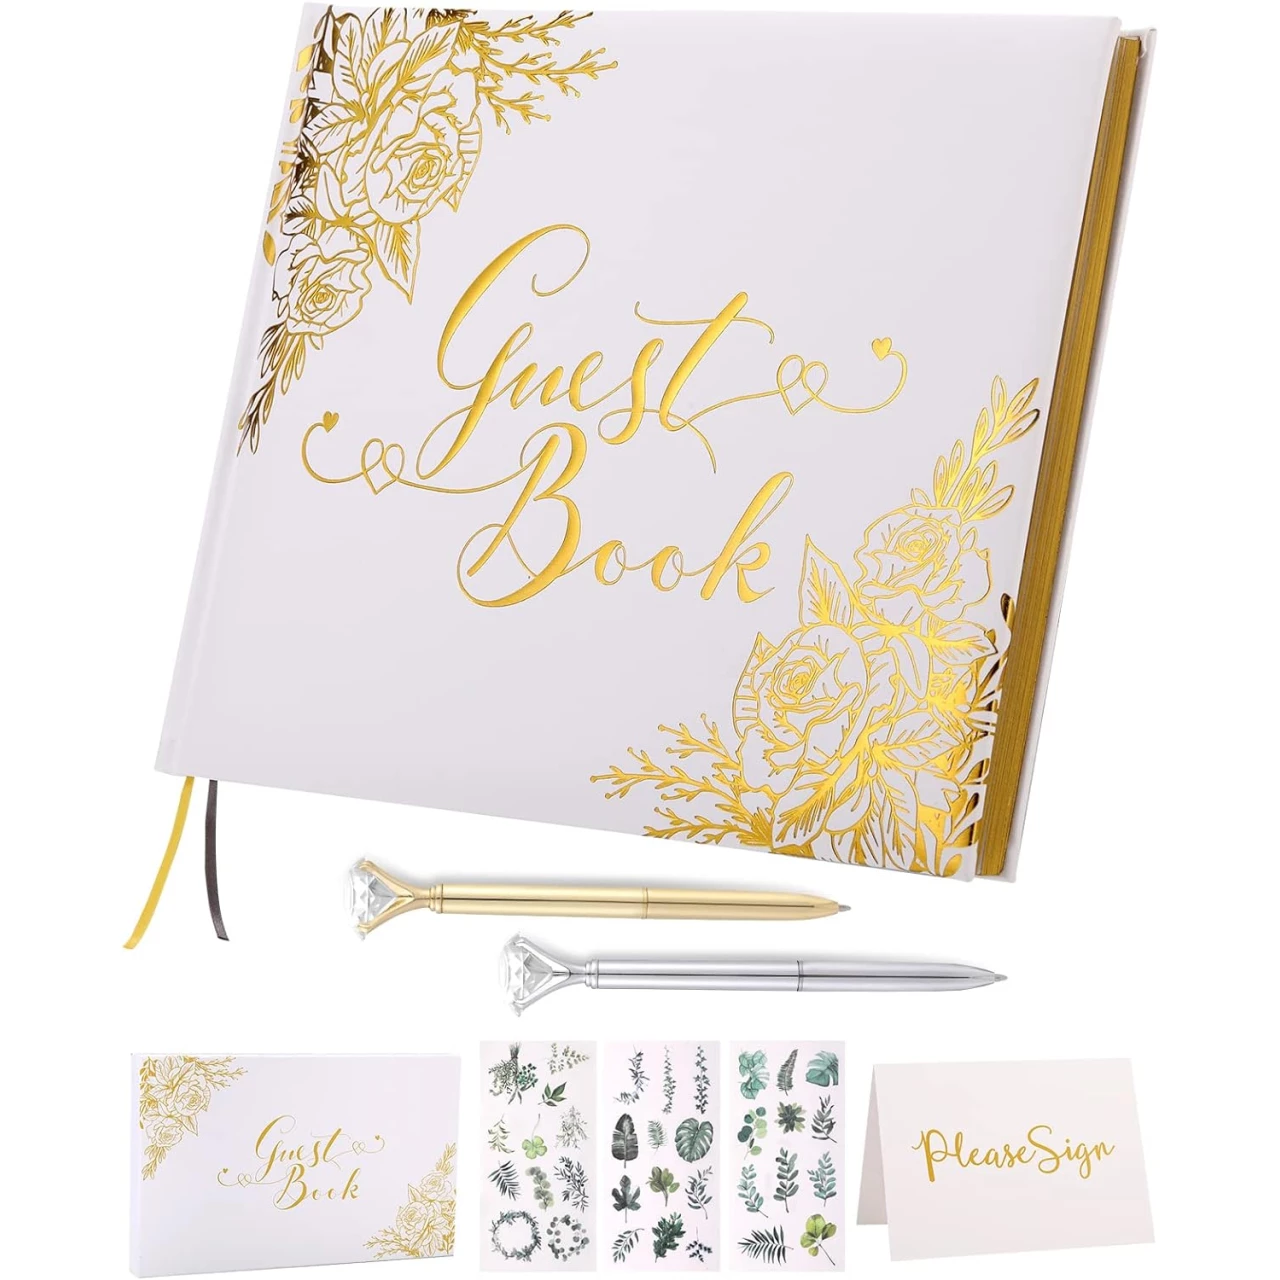 Wedding Guest Book - Guest Book Wedding Reception with Pens - 9x7&rsquo;&rsquo; Personalized Wedding Guestbook Photo Album Sign in Book - Gold Foil Hardcover &amp; Gilded Edges, for Weddings, Baby Shower, Party